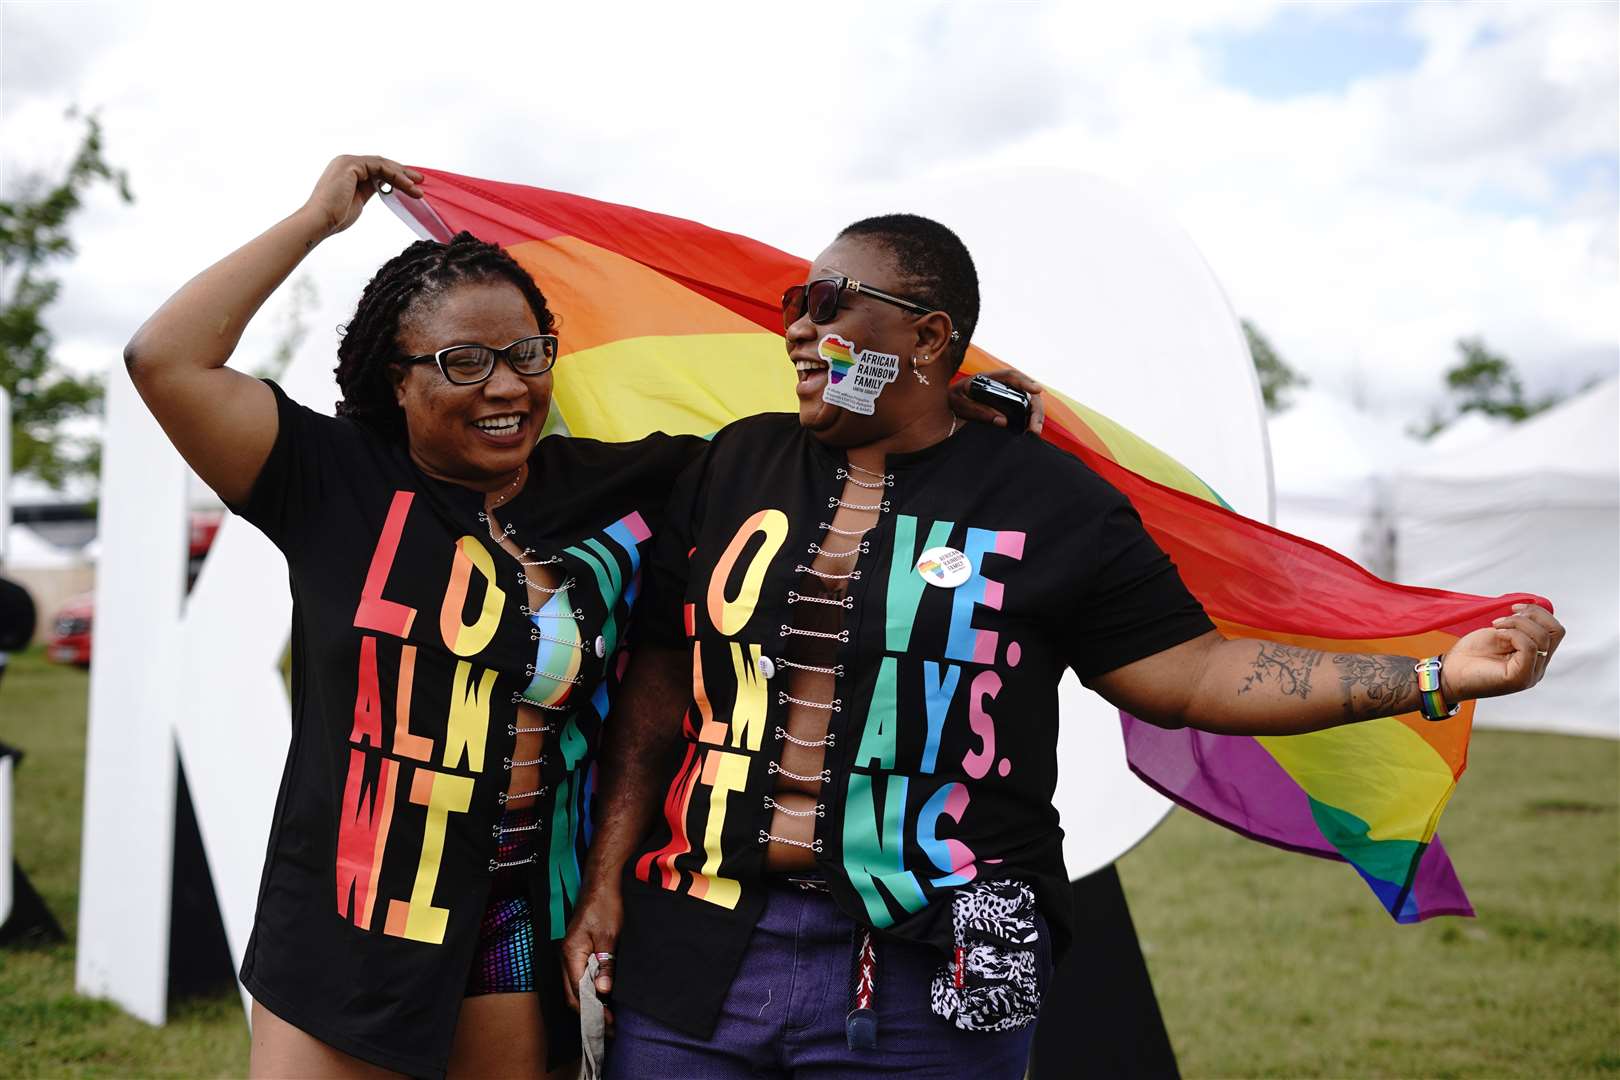 People taking part in UK Black Pride at the Queen Elizabeth Olympic Park in east London (Lucy North/PA)